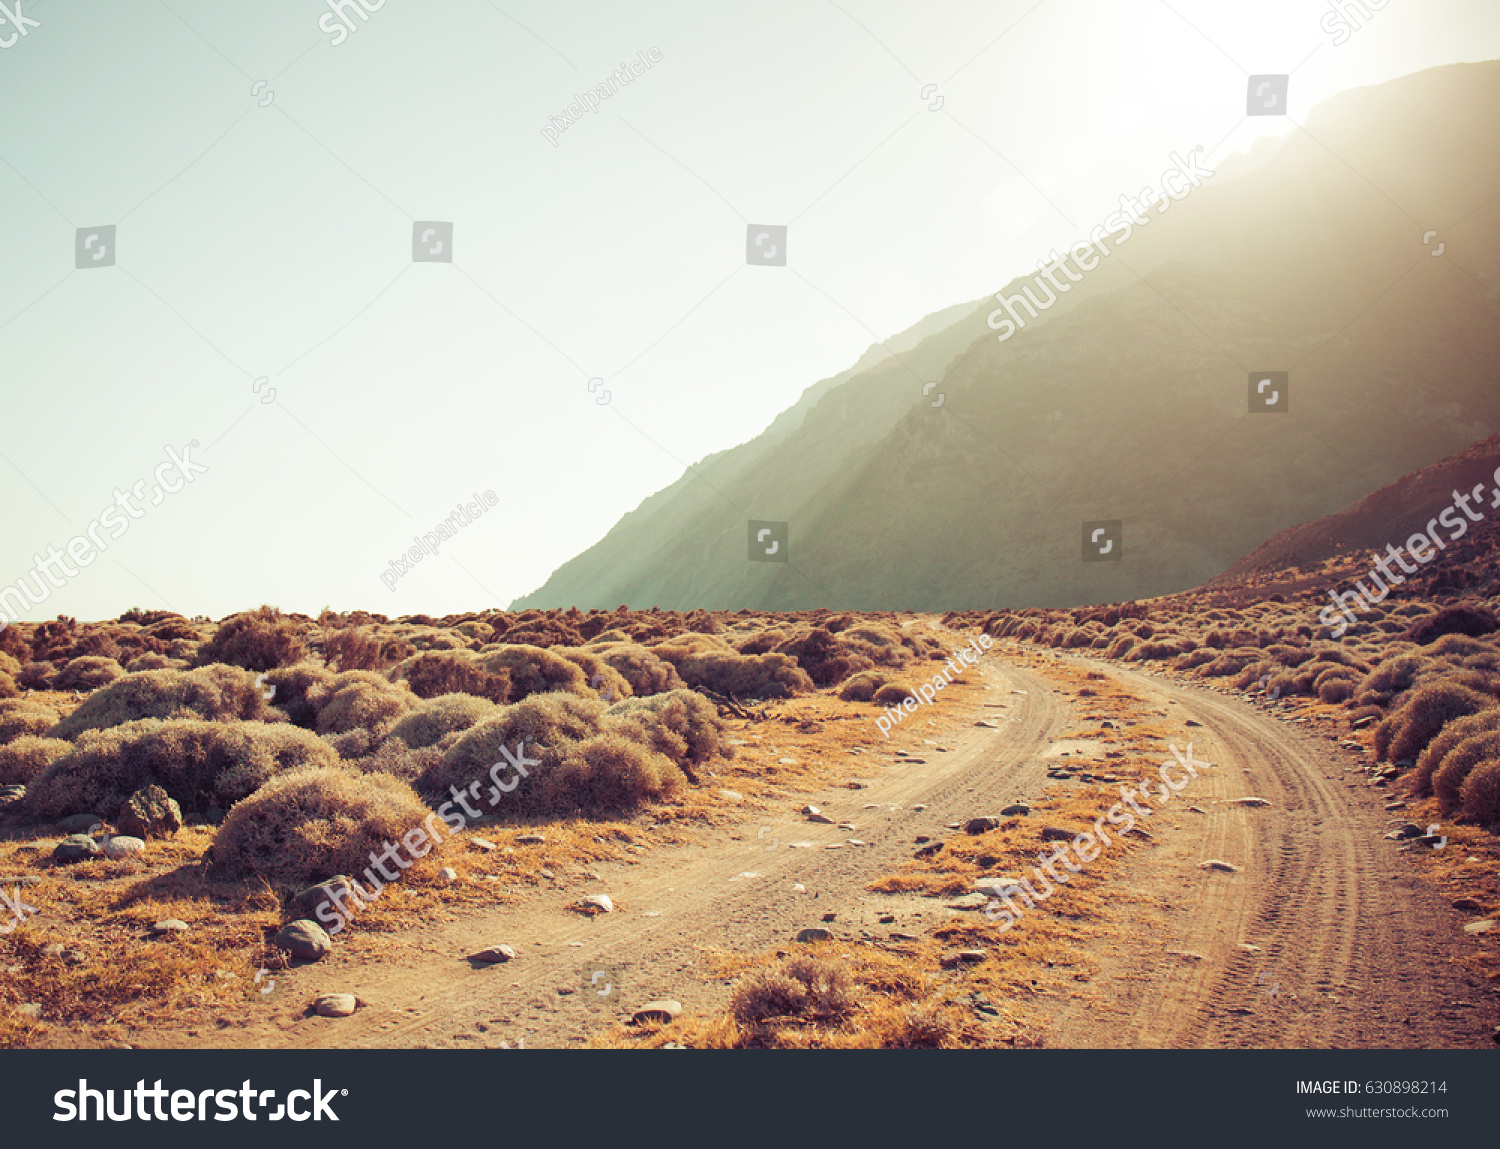 Dirt road rally background #630898214